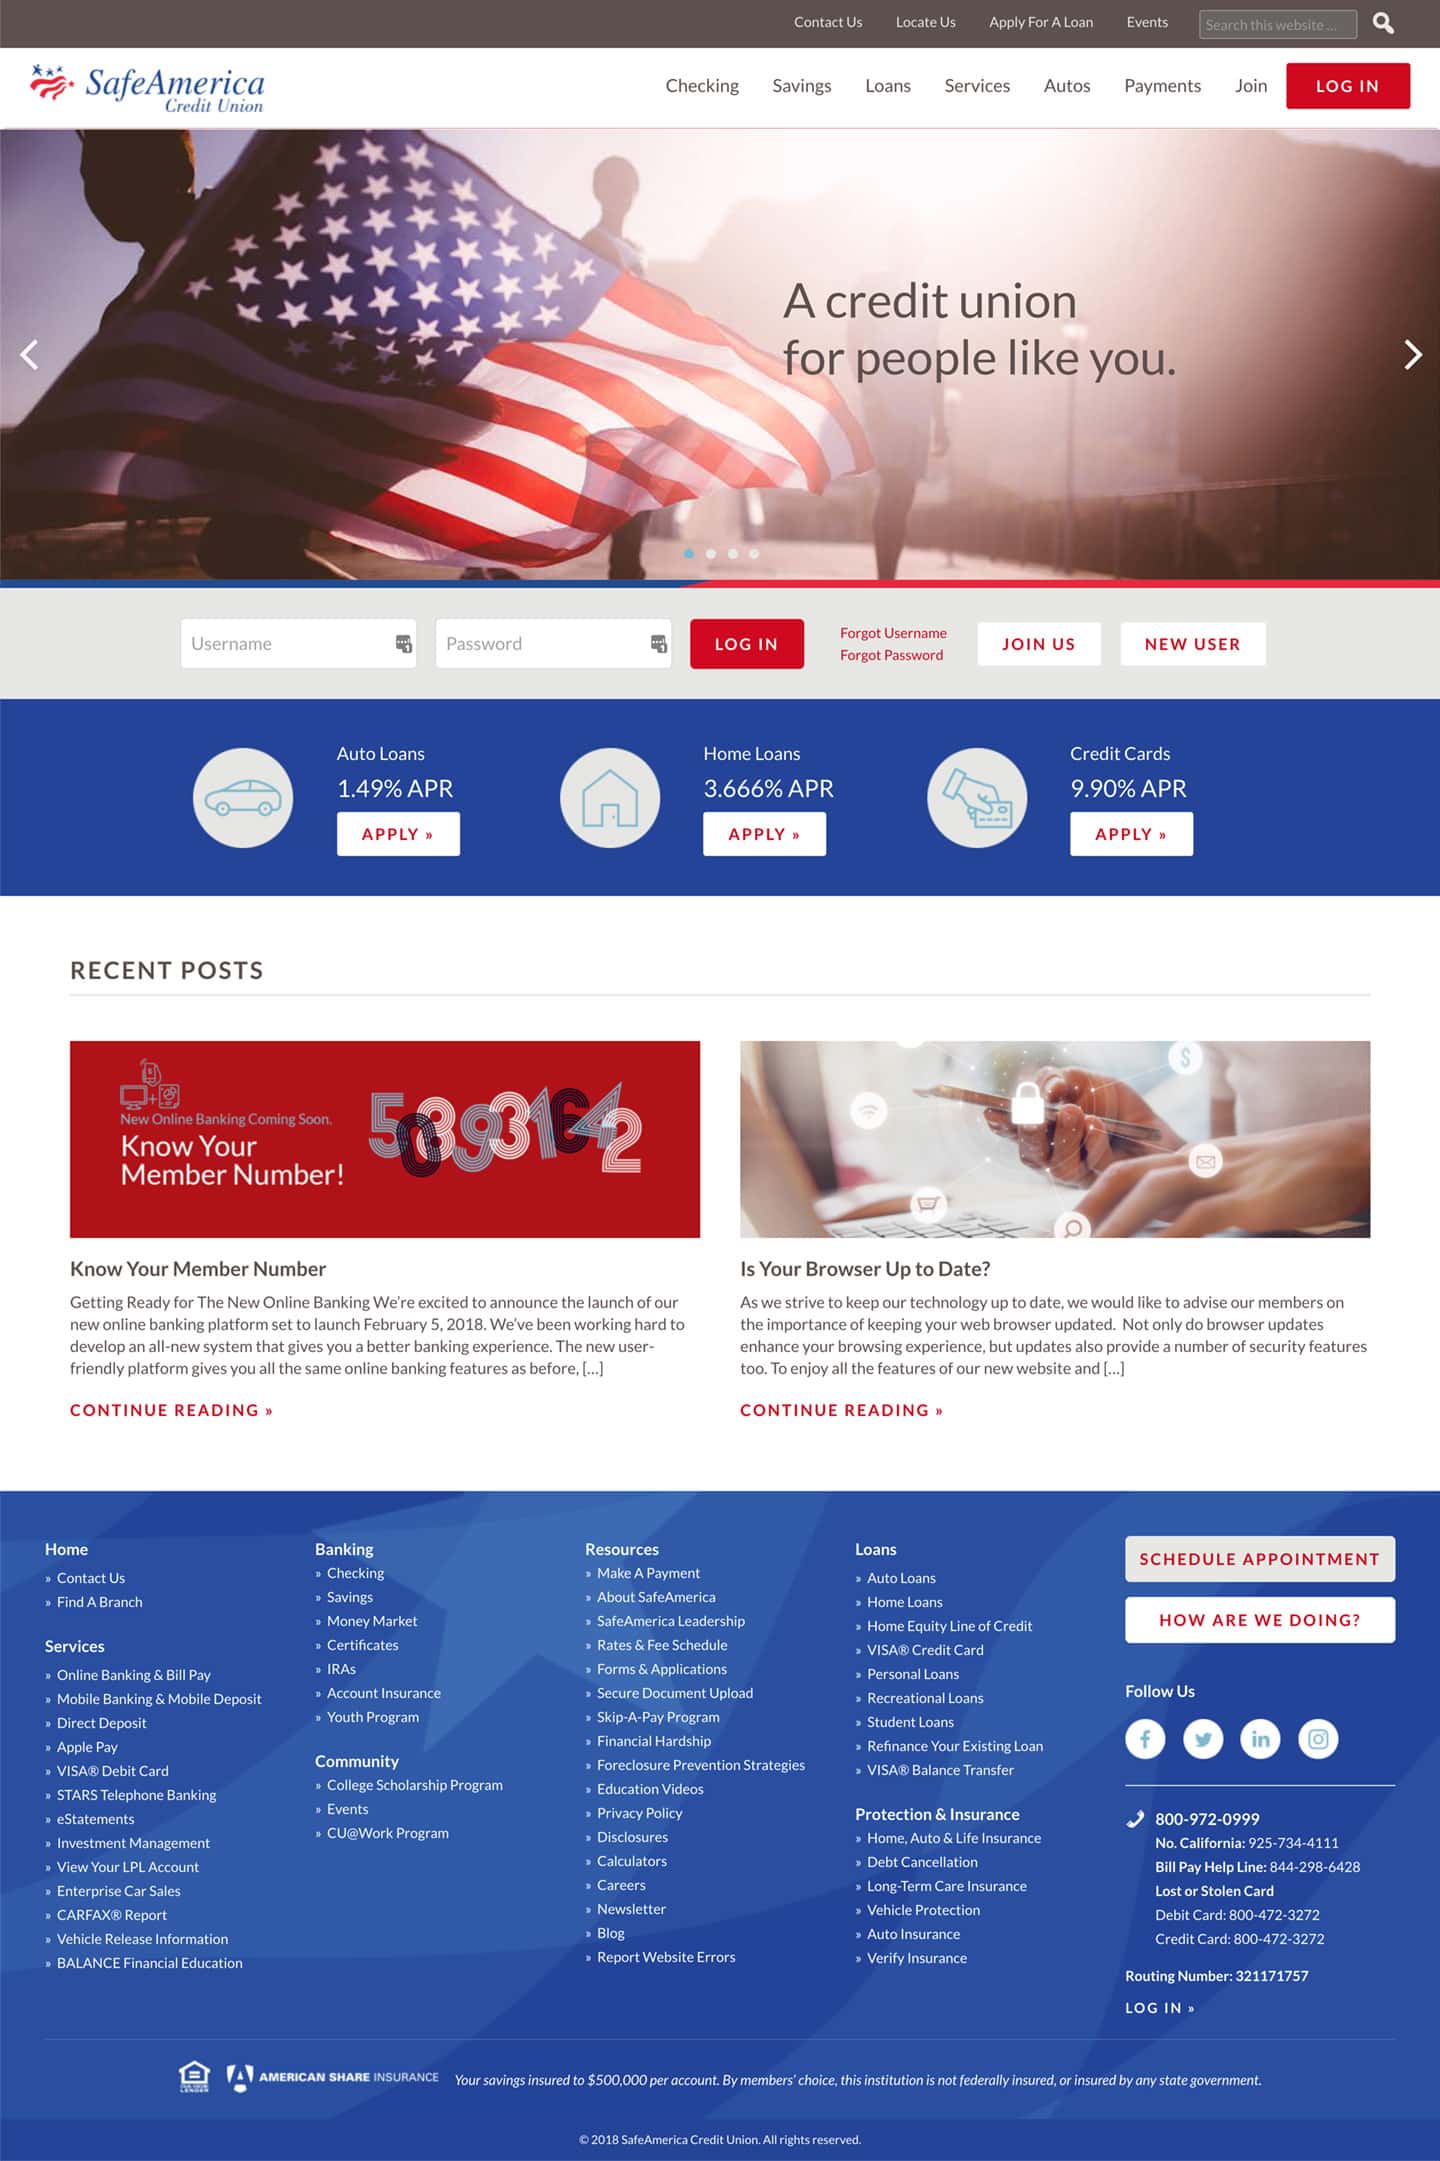 SafeAmerica Homepage